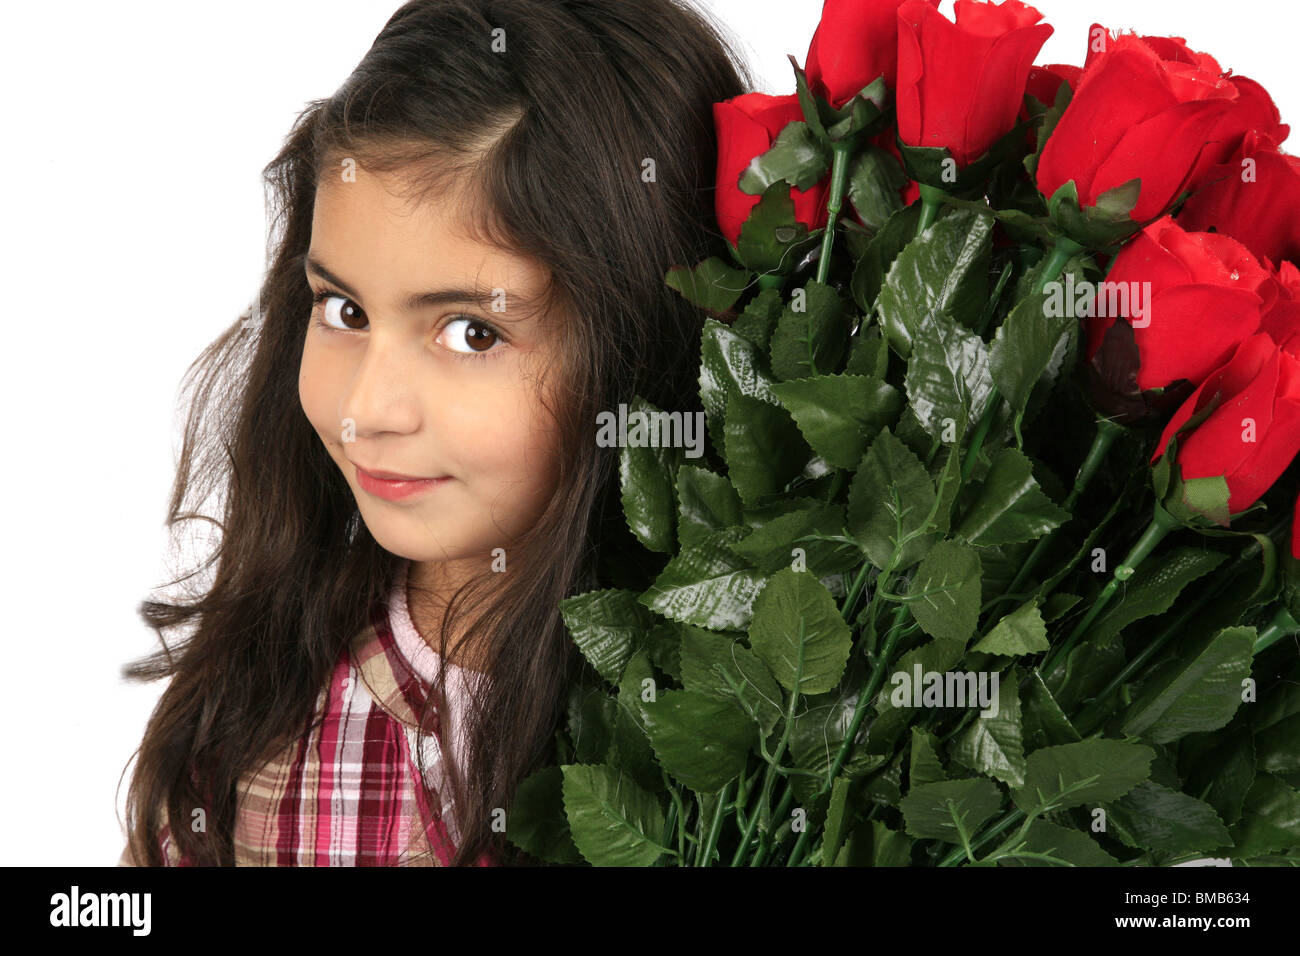 little girl with a bunch of red roses Stock Photo